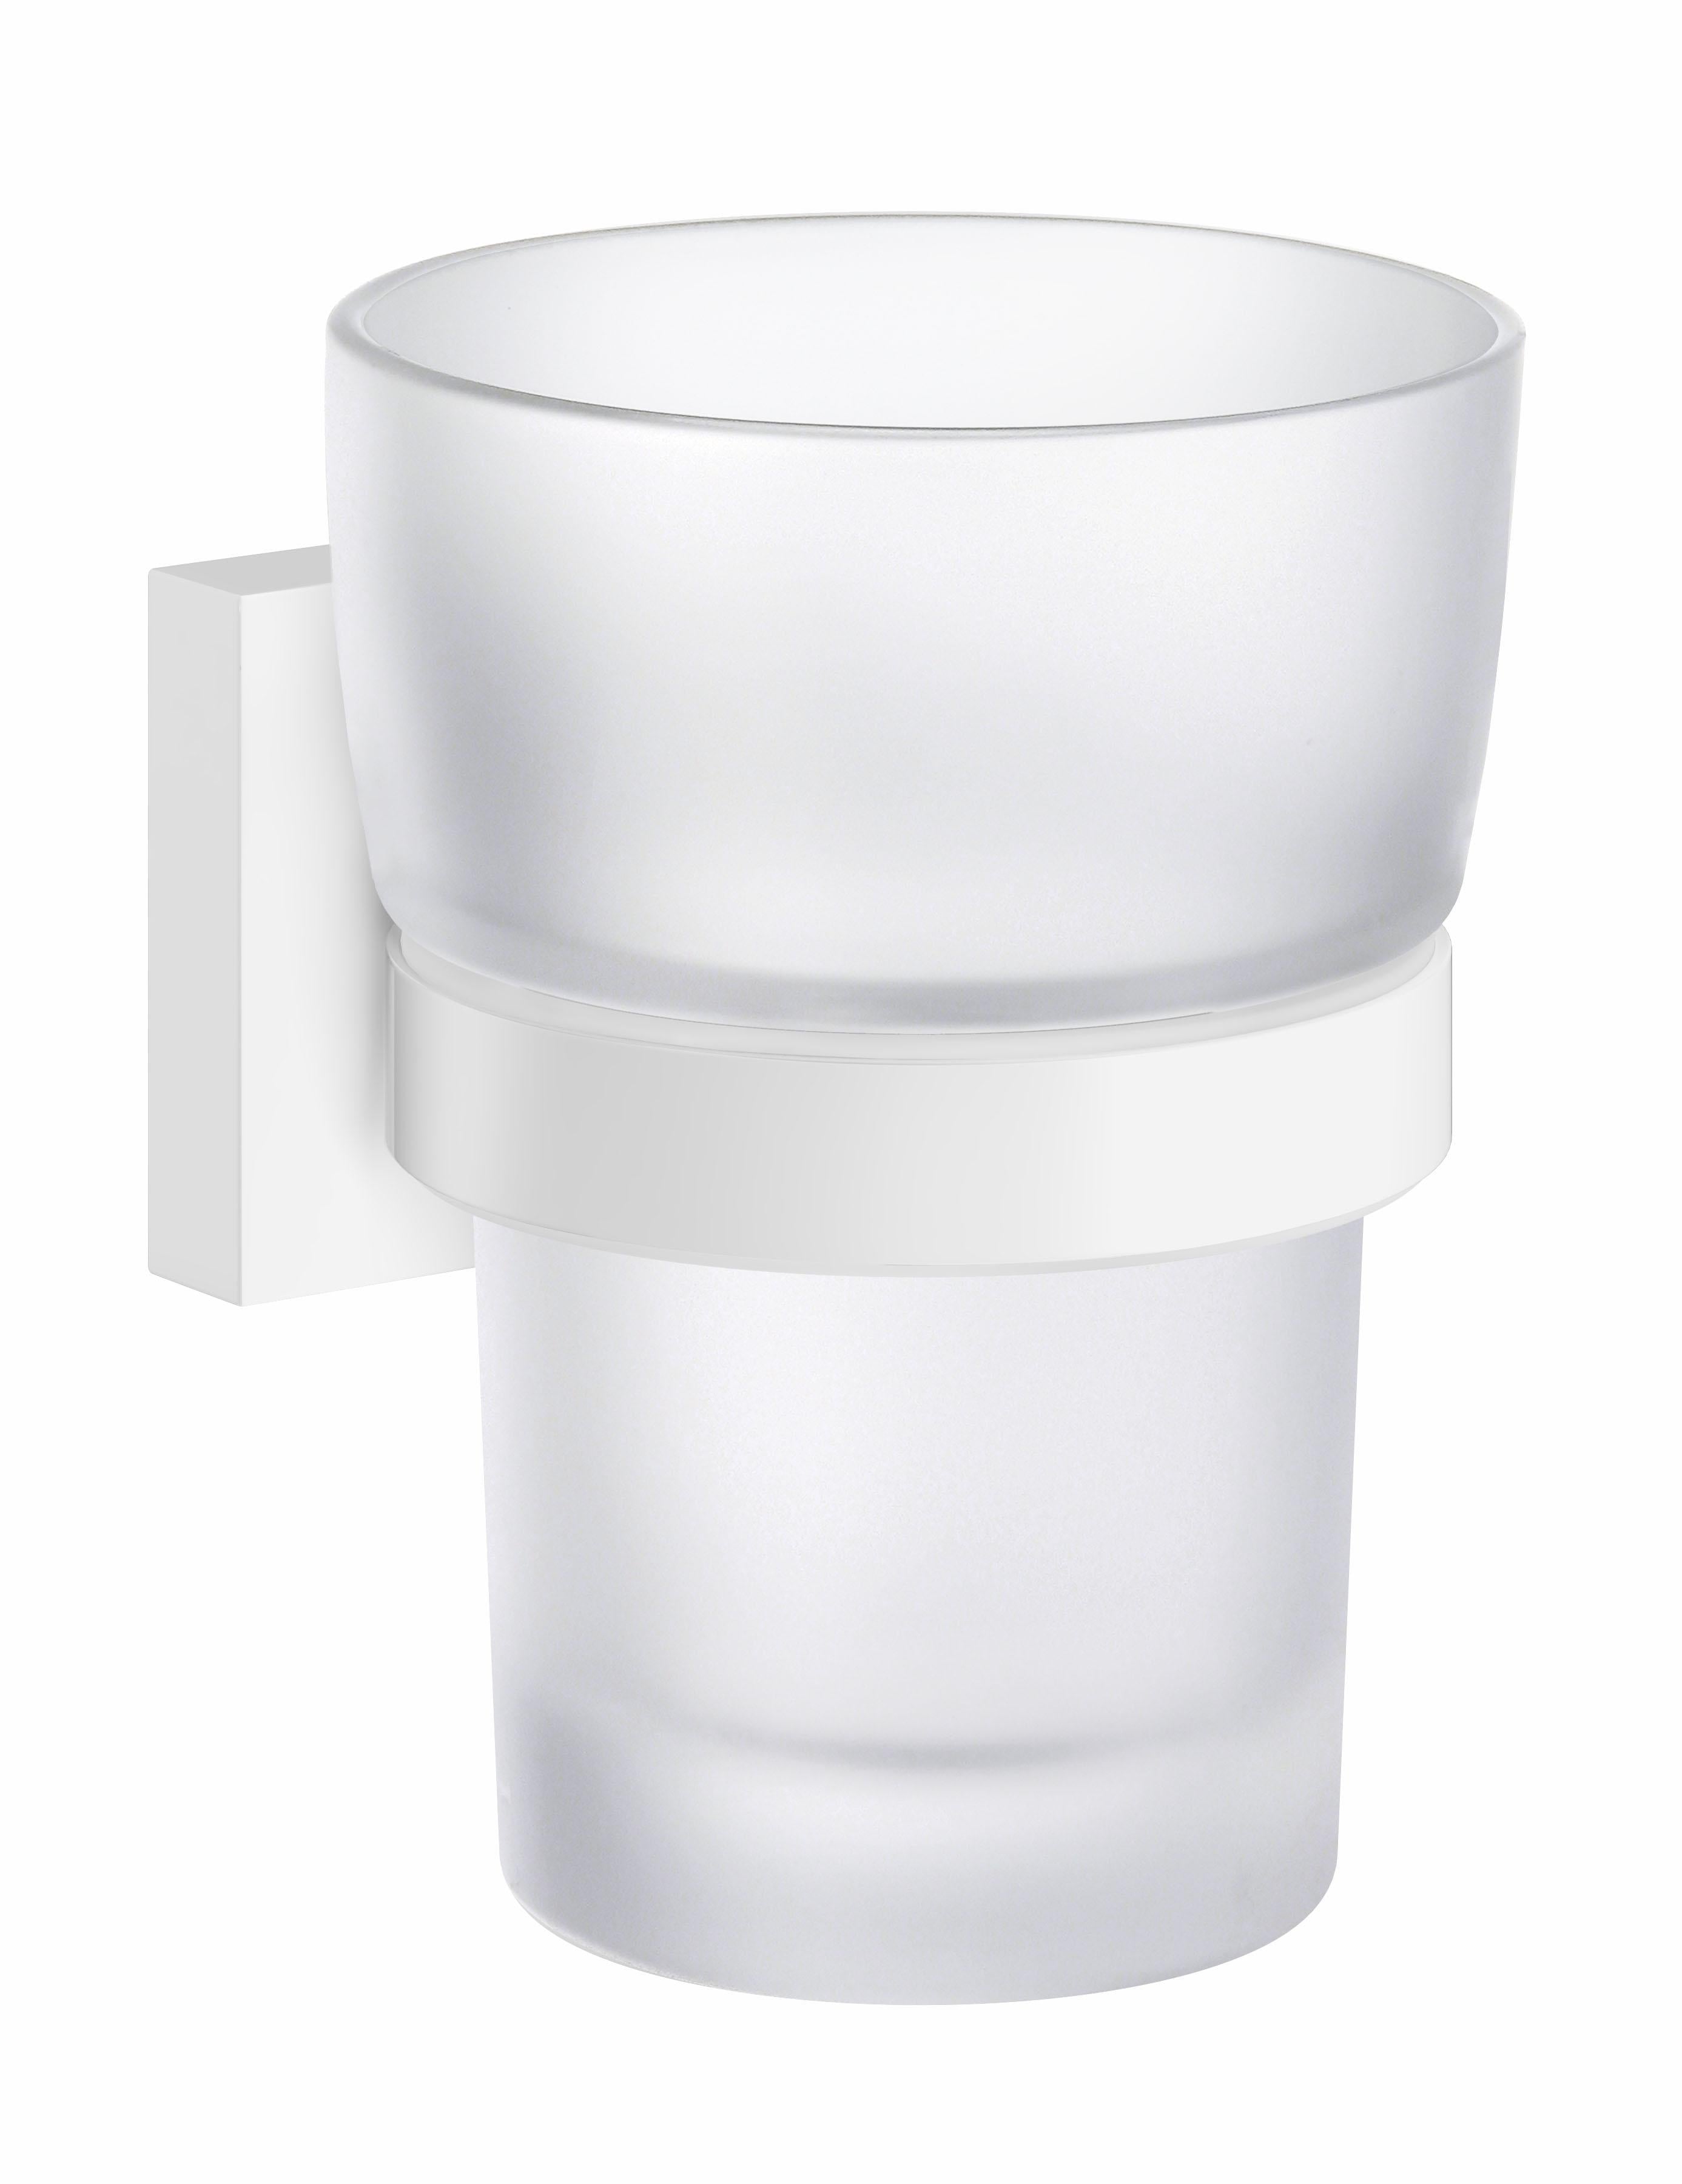 Smedbo House Holder with Frosted Glass Tumbler